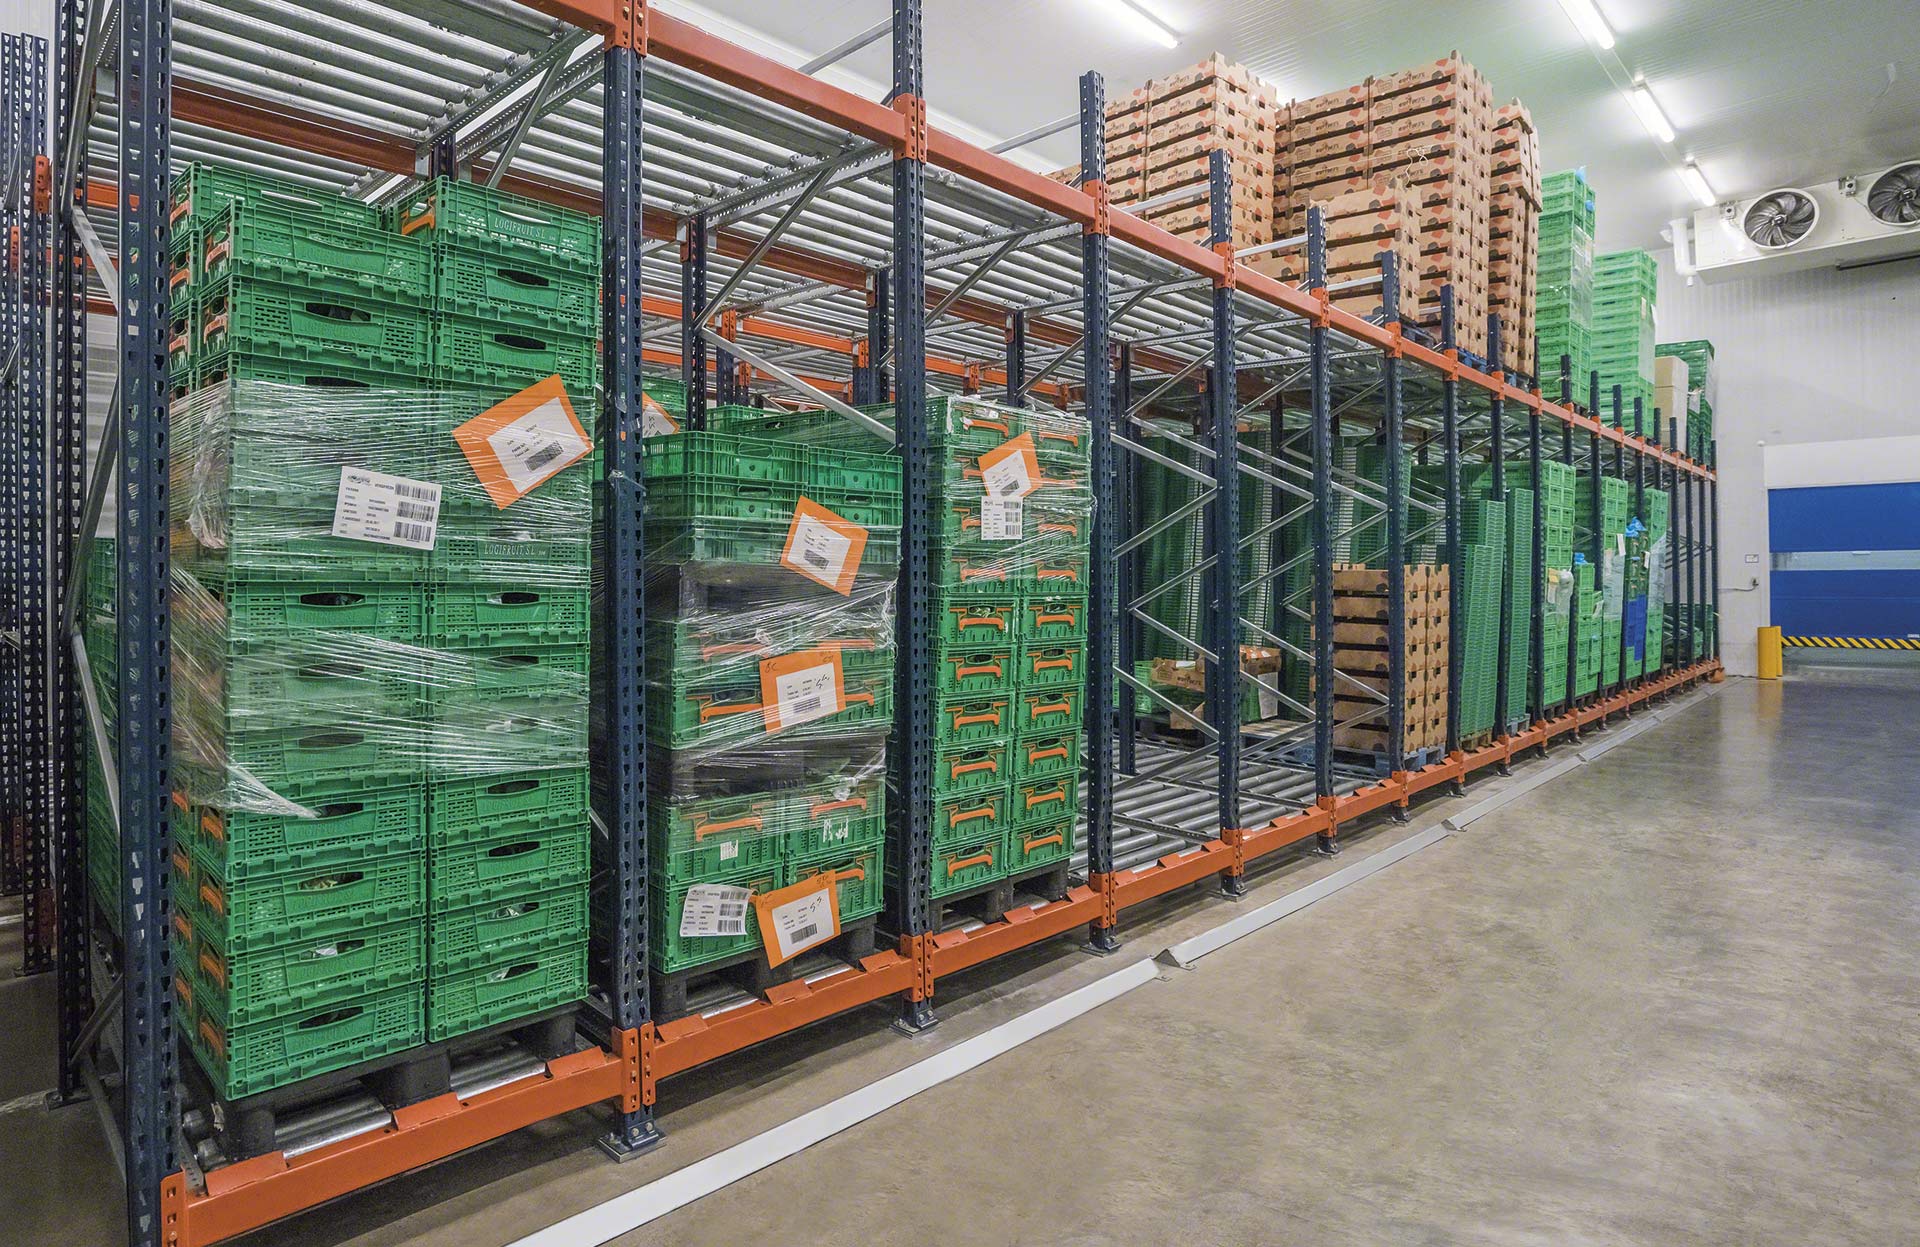 The push-back rack is ideal for freezer warehouses, as the carts are designed to withstand temperatures as low as -30 °C